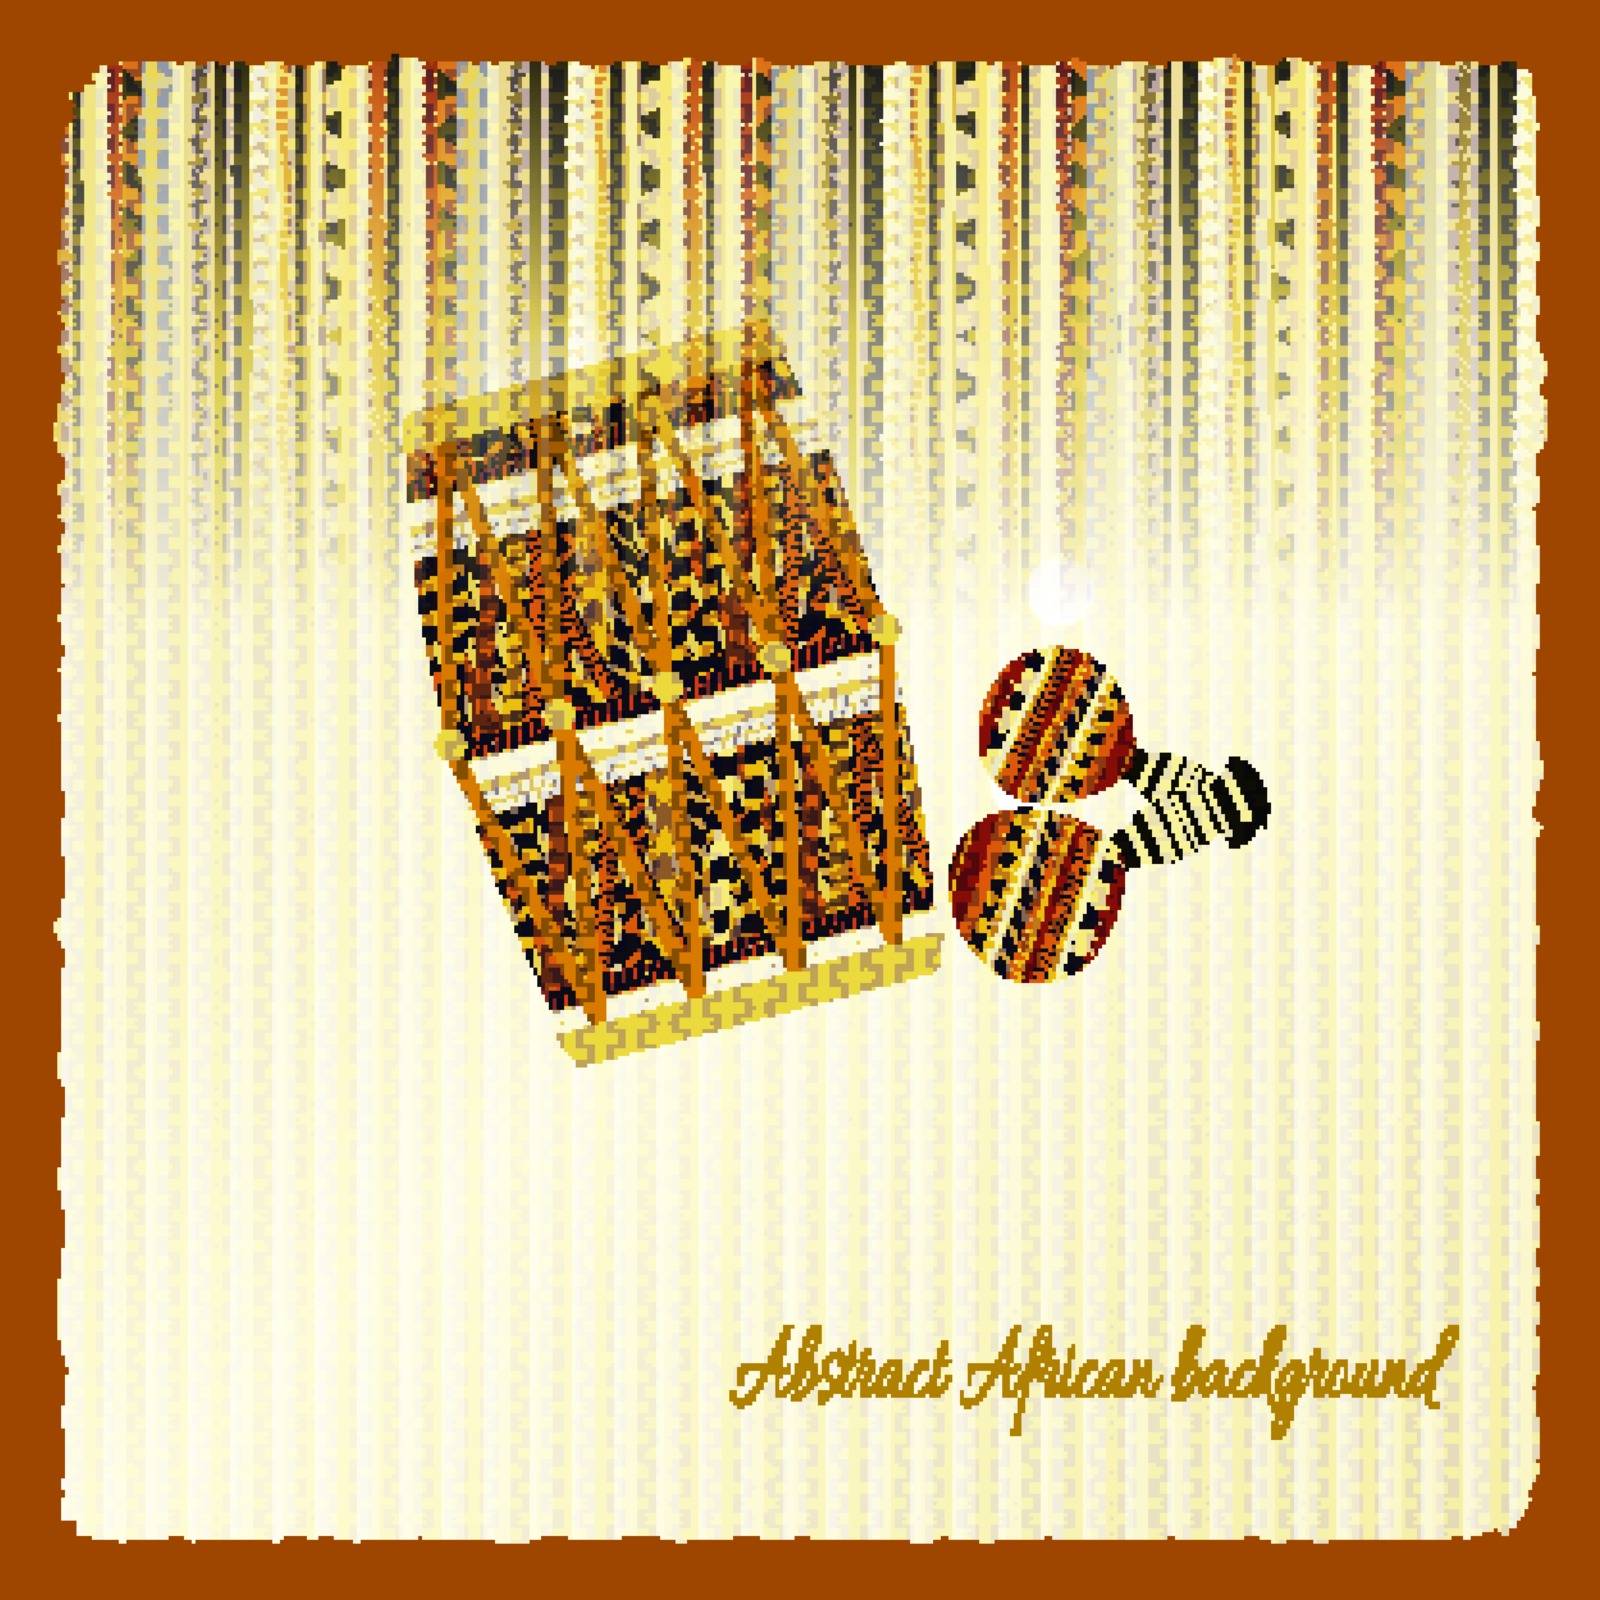 Vintage background with African drum and maracas by Larser